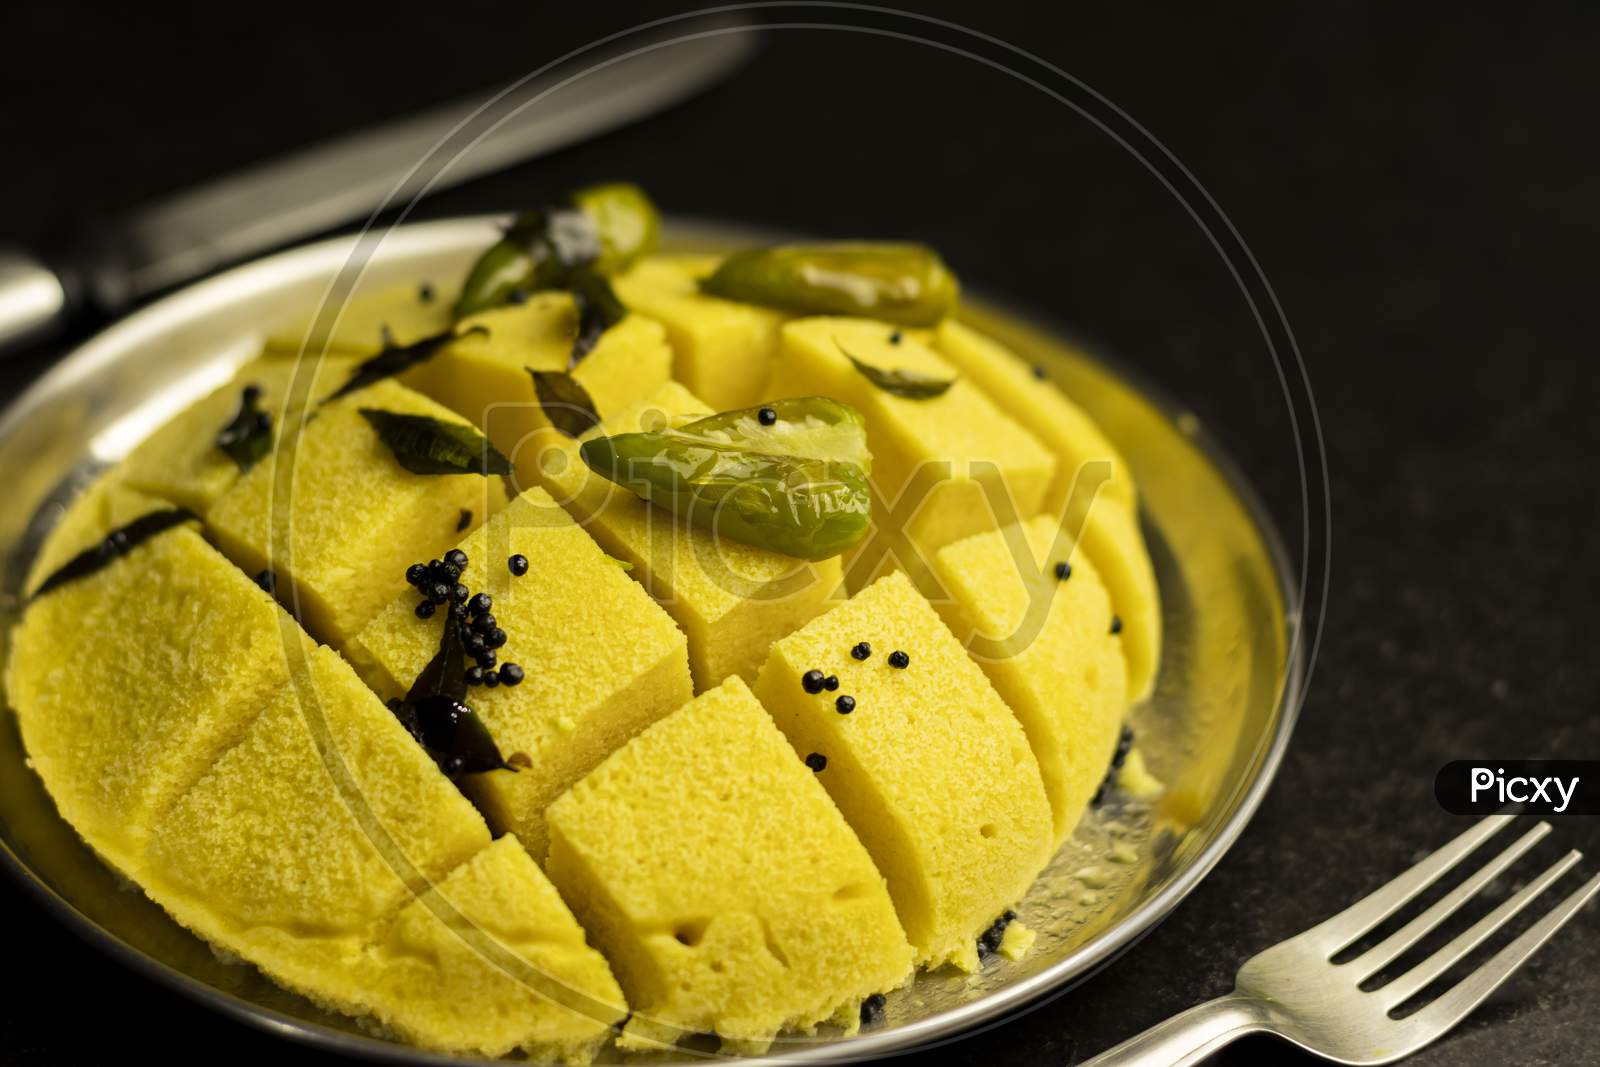 Slices Of Besan Dhokla An Indian Gujrati Vegetarian Food On Plate With Fork And Knife On Black Background And With Selective Focus